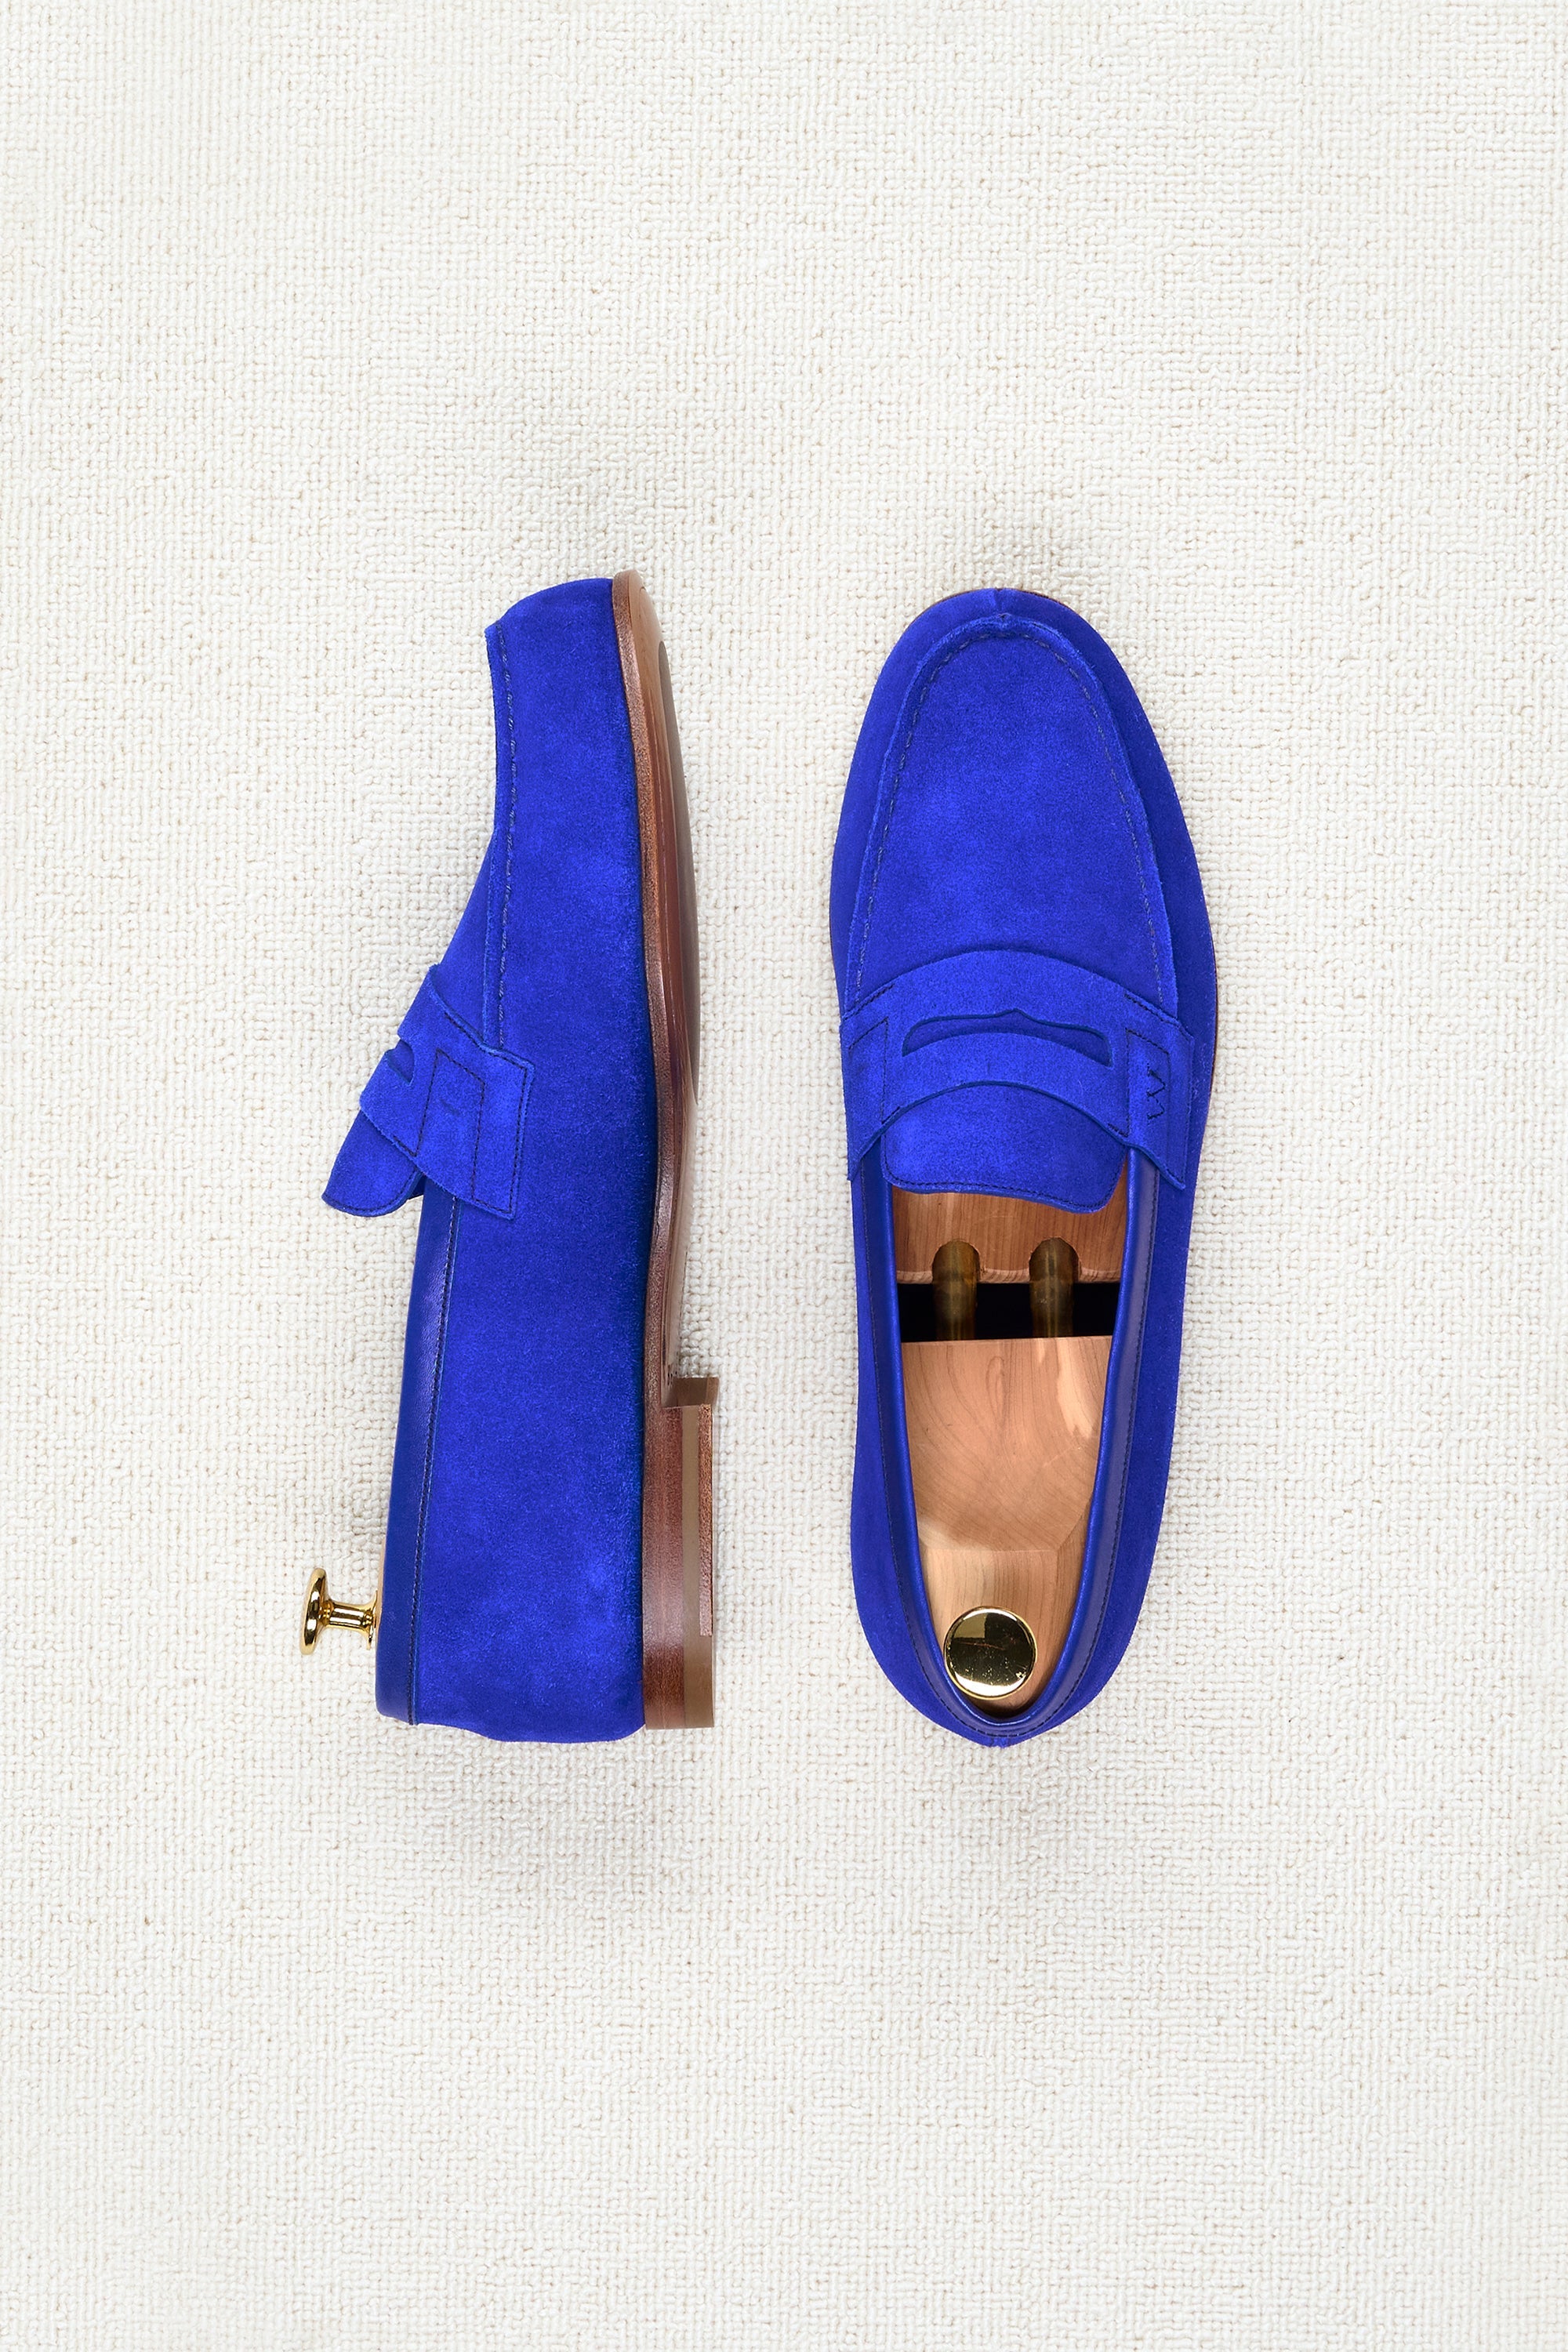 J.M. Weston Blue Suede Penny Loafers